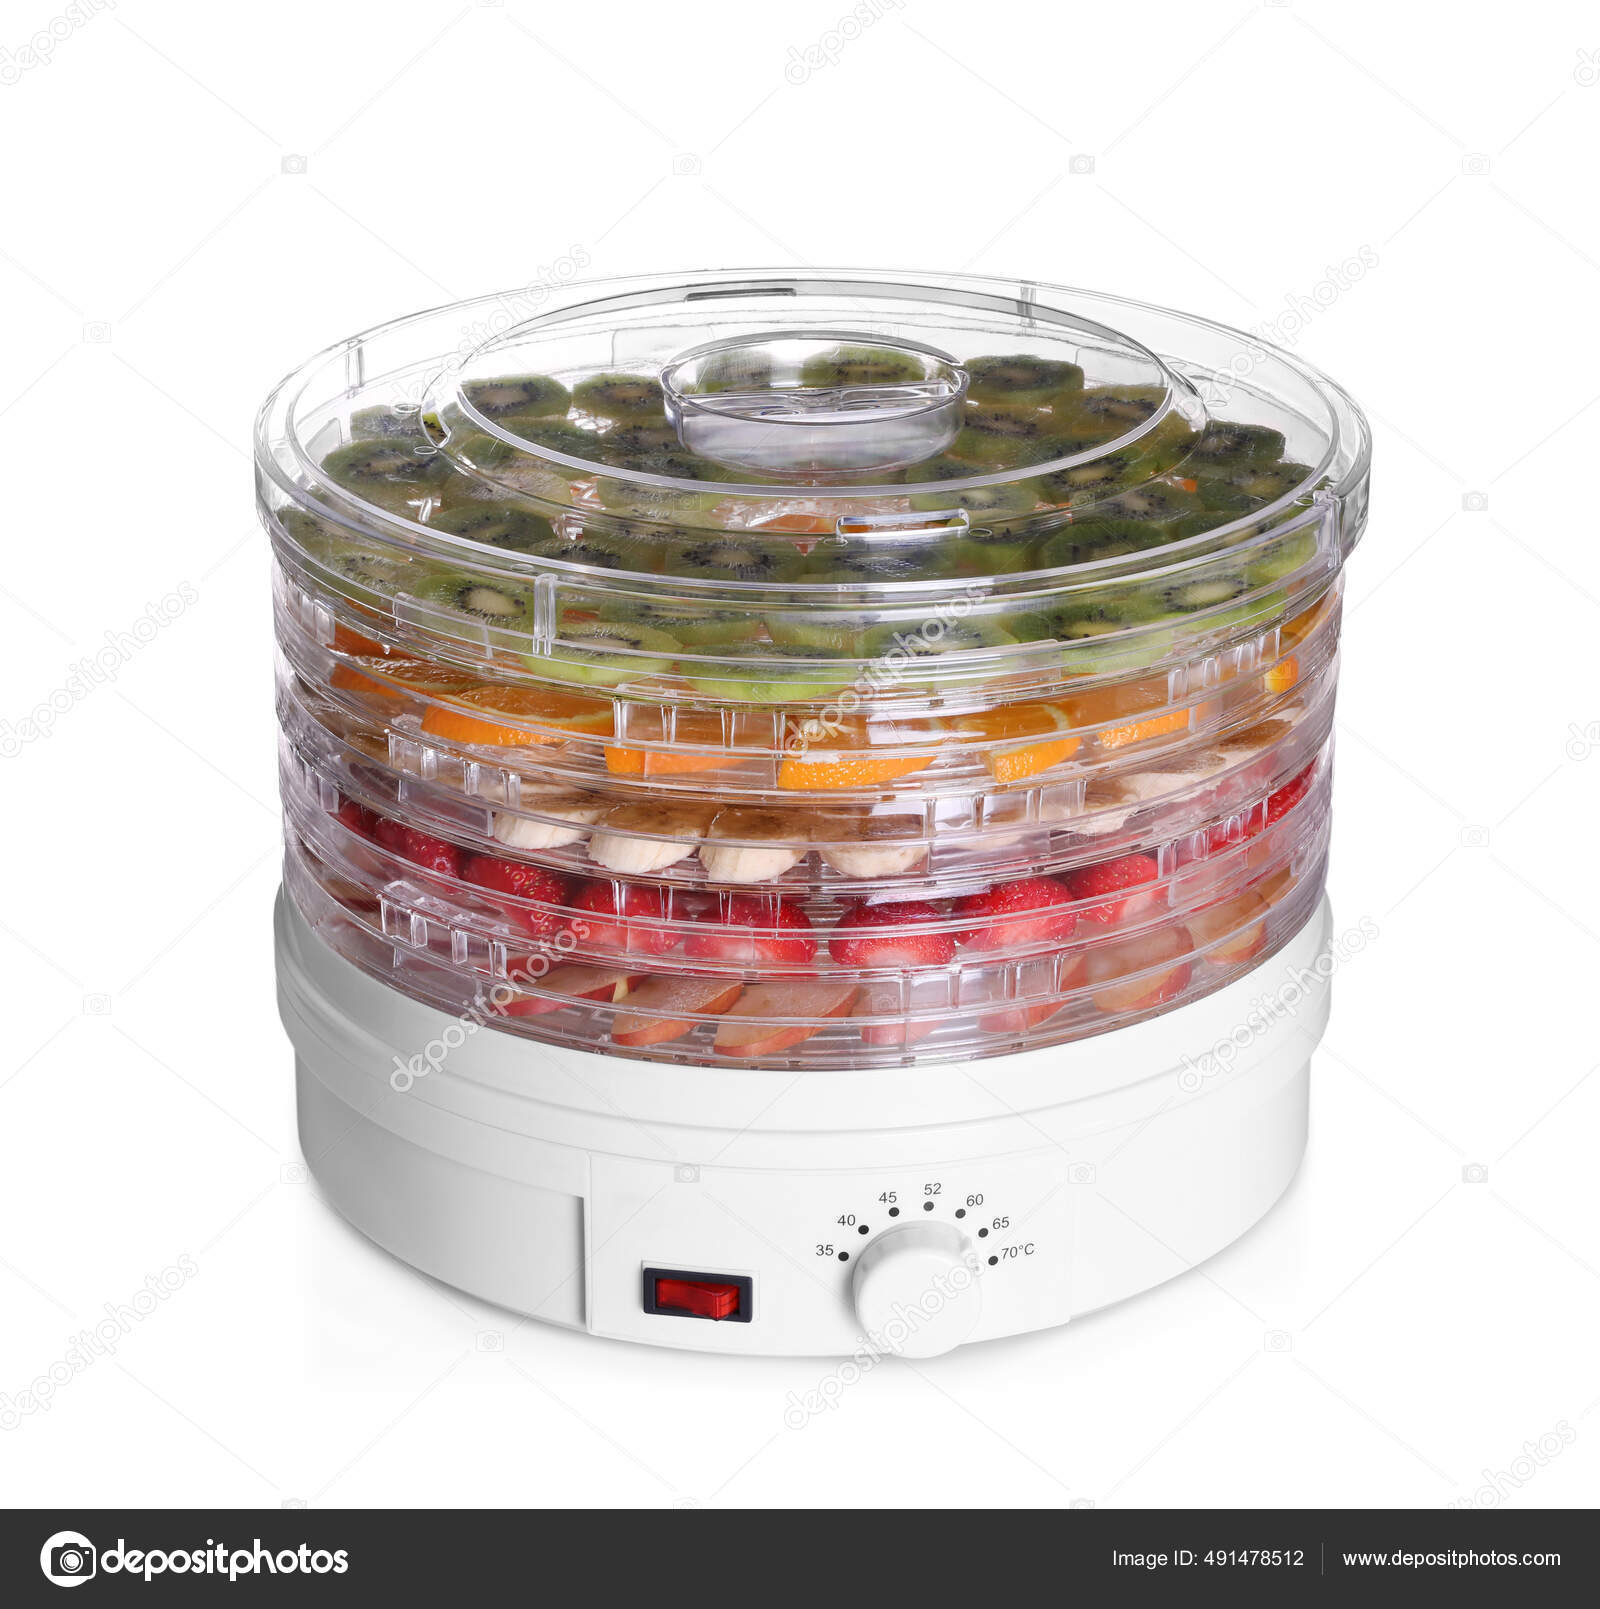 Food dehydrator isolated Stock Photos, Royalty Free Food isolated Images | Depositphotos